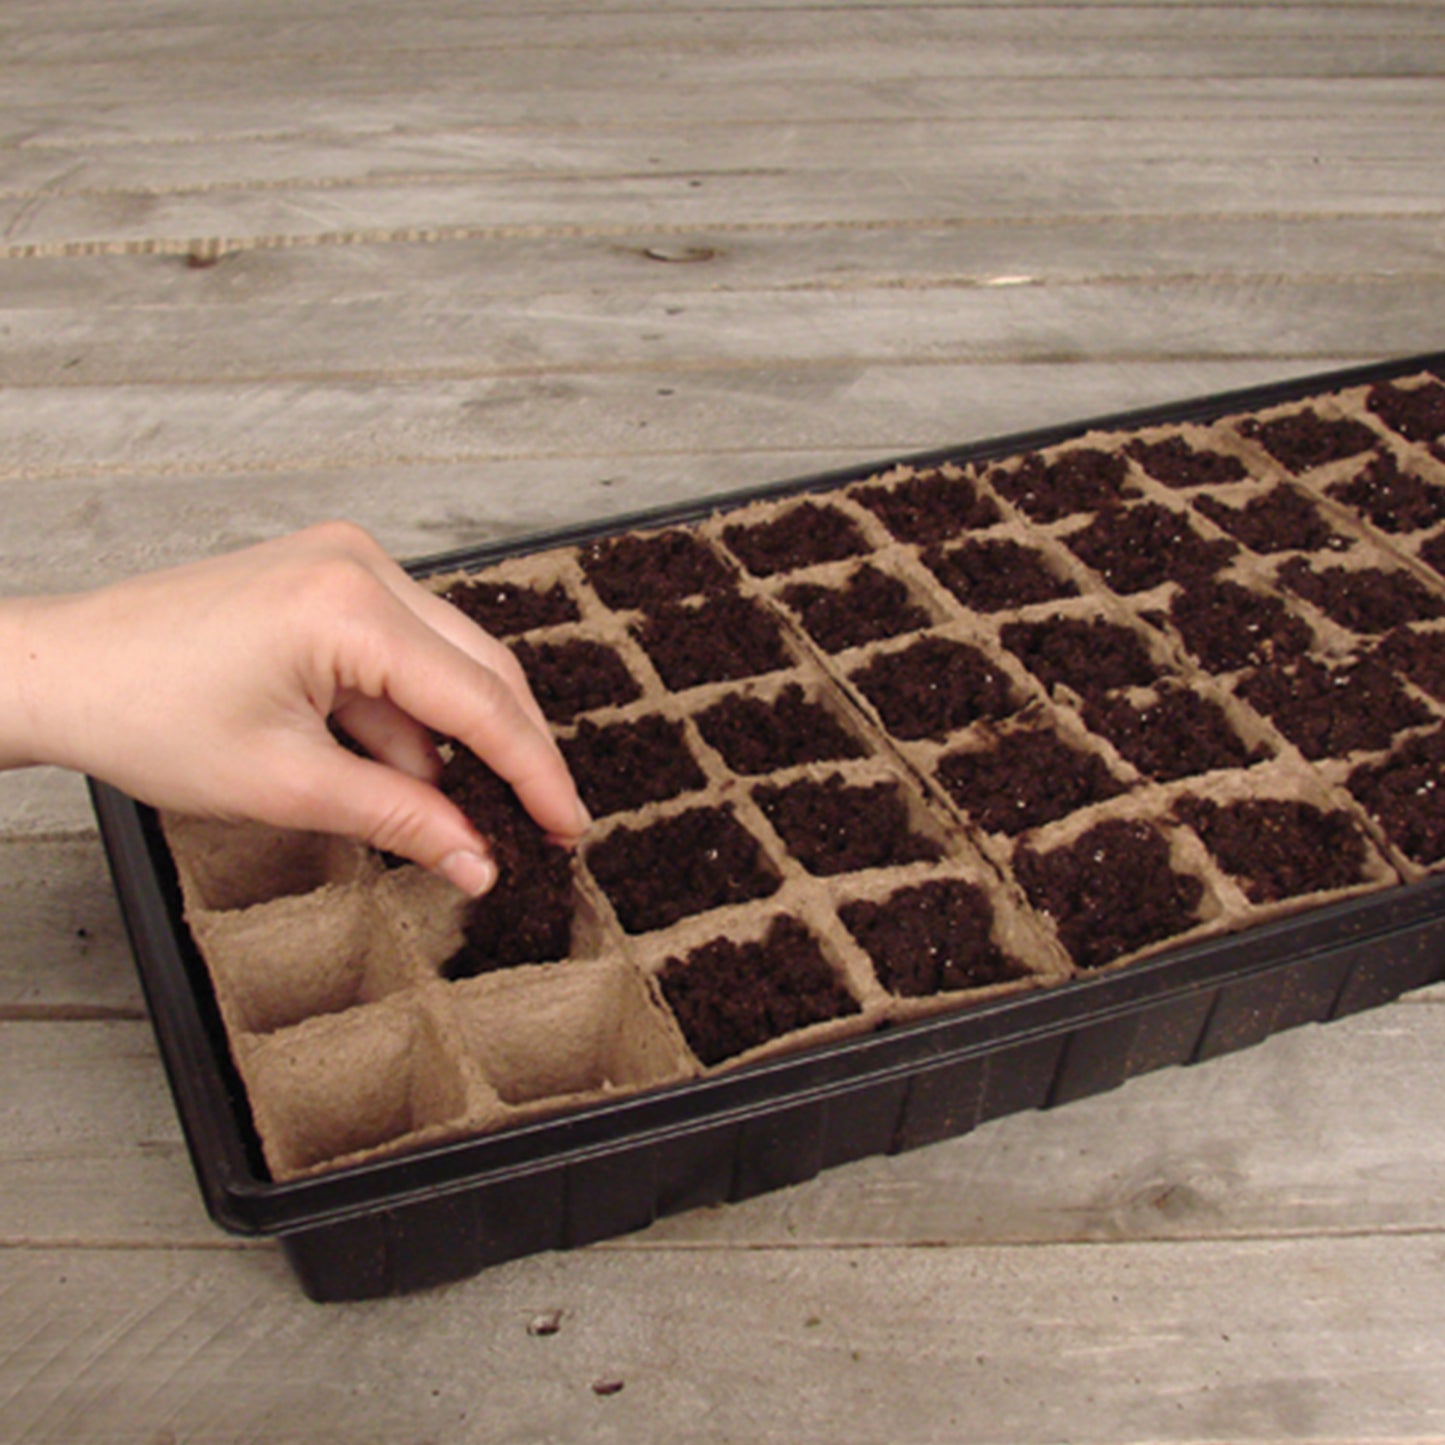 Add sowing medium to your peat strips.